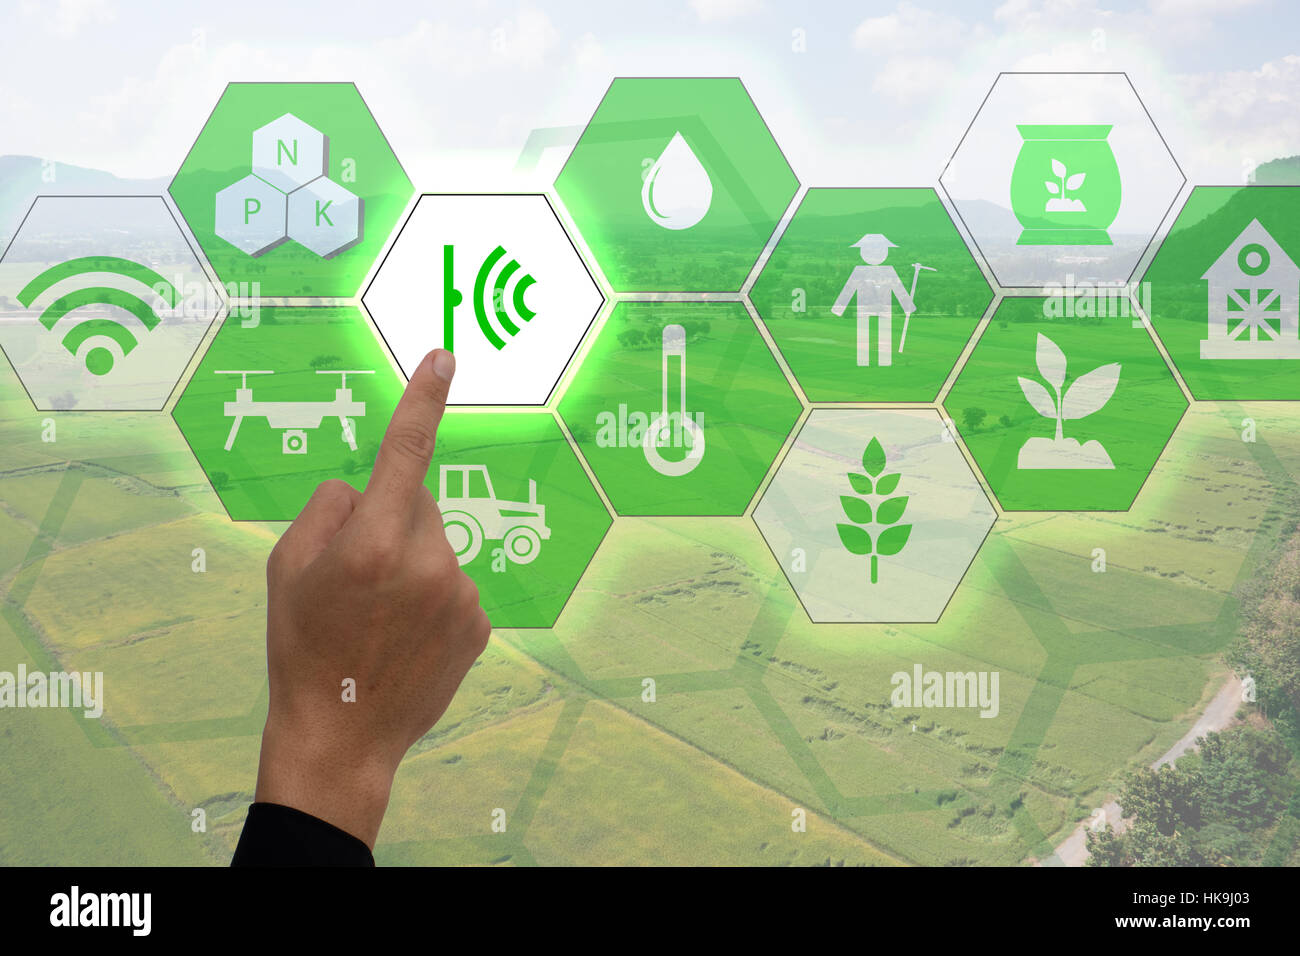 Internet of things(agriculture concept),smart farming,industrial agriculture.Farmer point hand to use augmented reality technology to control ,monitor Stock Photo